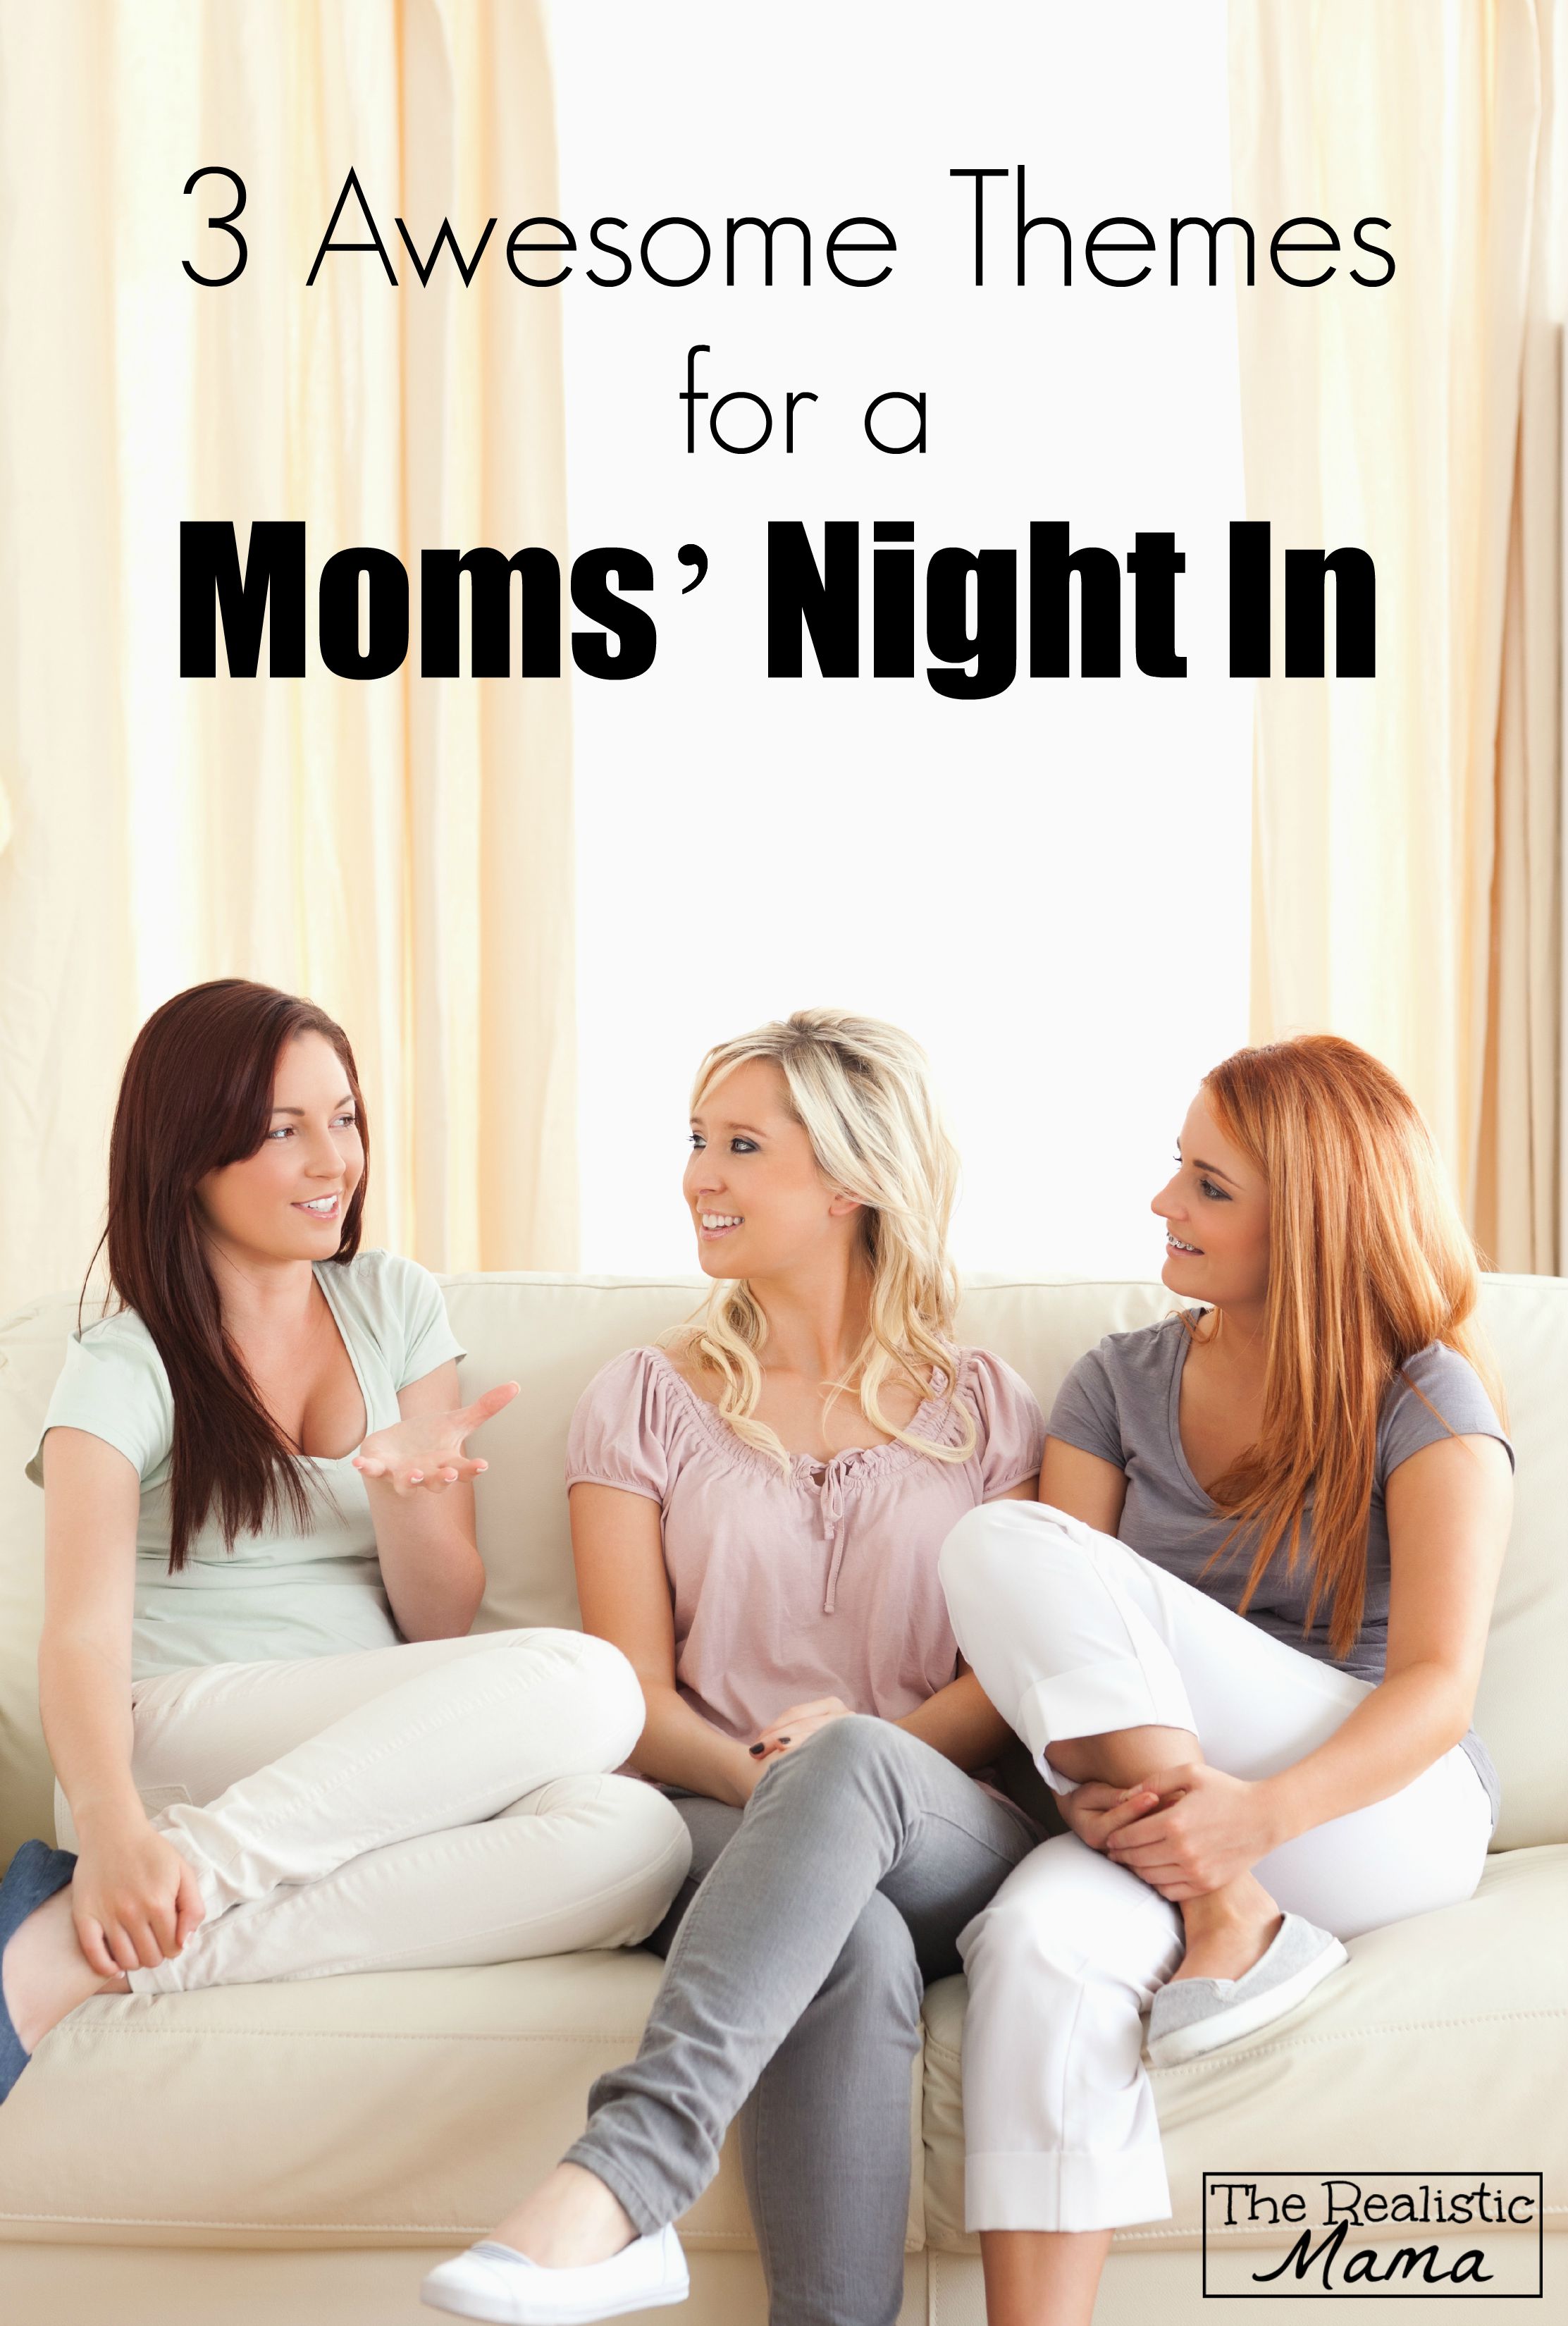 3 awesome themes for a moms' night in. It's time to stop talking about it and and just do it!